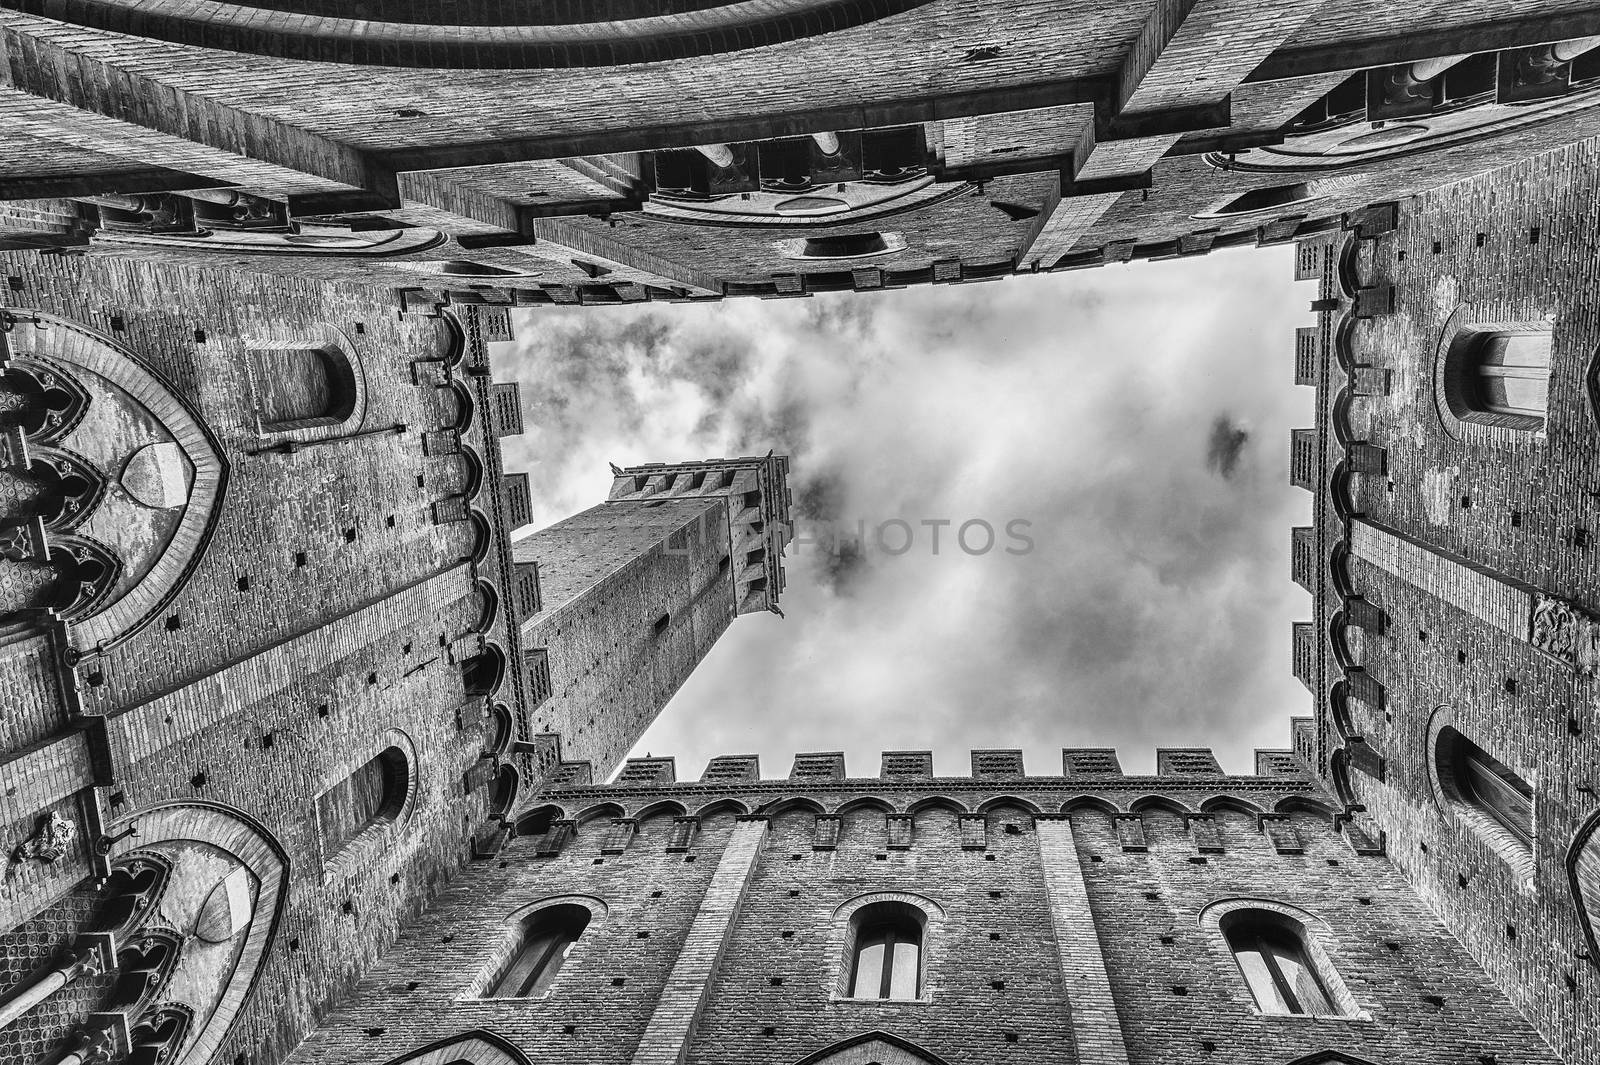 View from the bottom, patio of Palazzo Pubblico, Siena, Italy by marcorubino